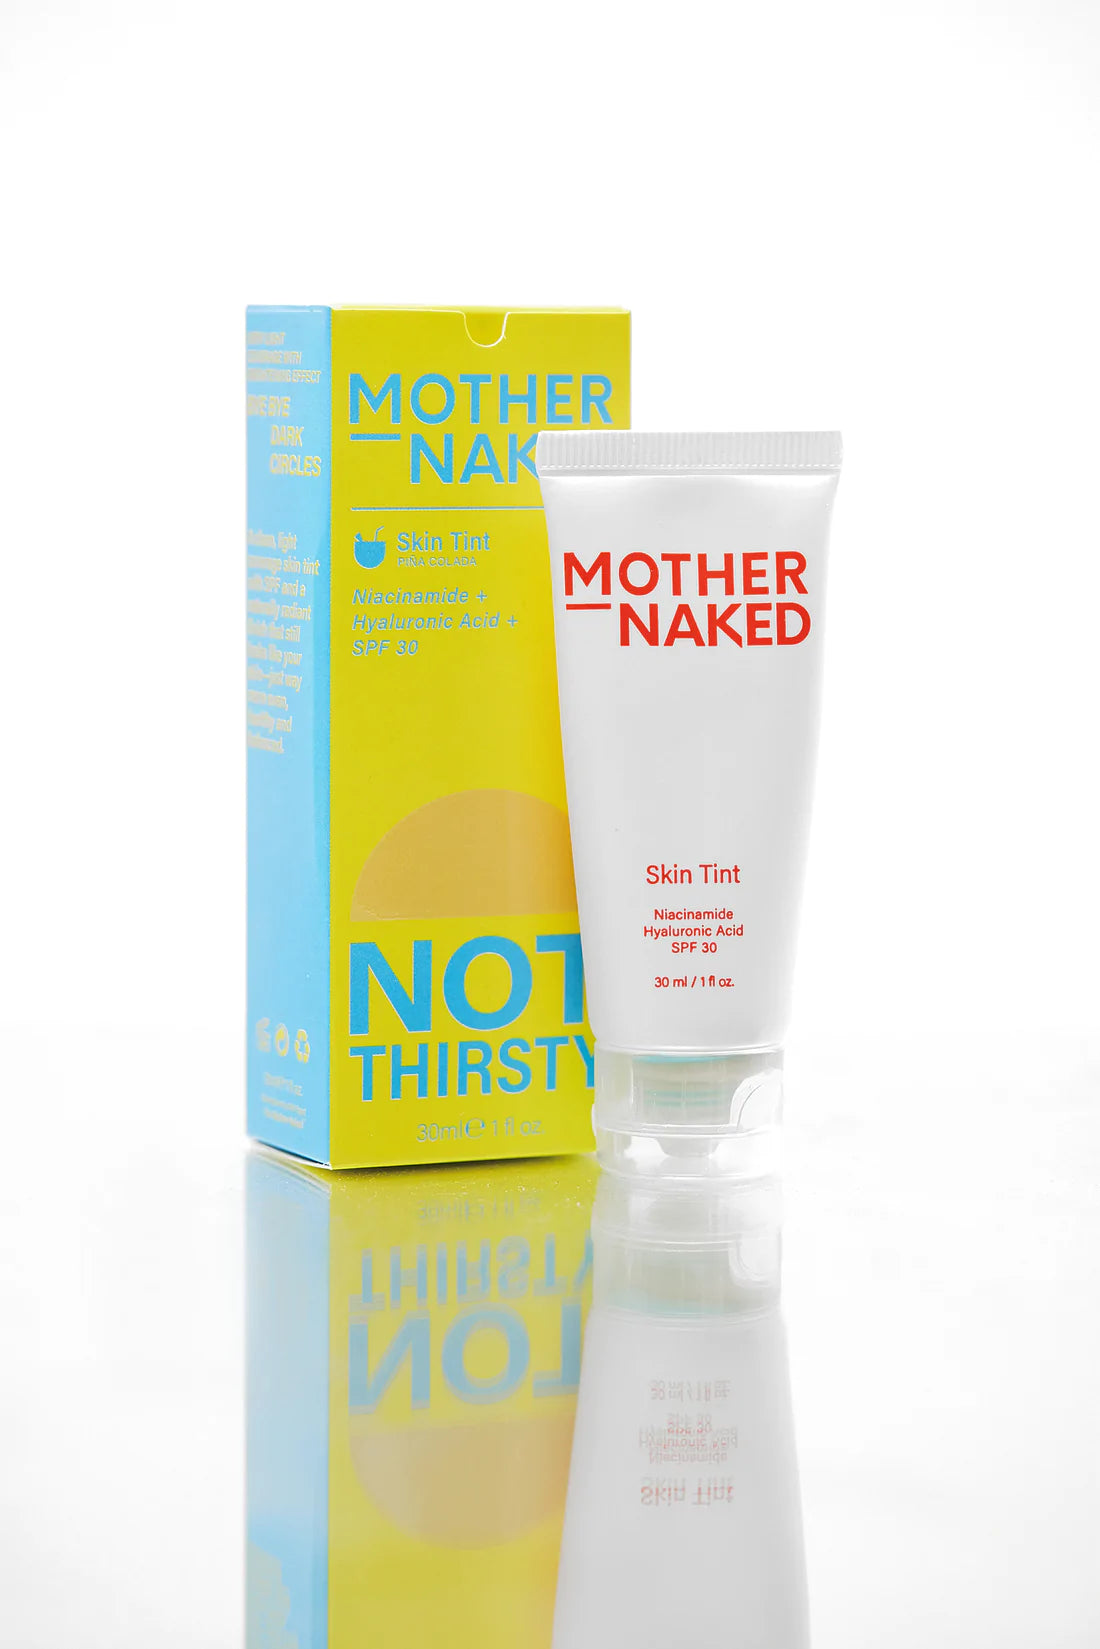 Pina Colada Brightening Tinted Moisturizer SPF 30 by Mother Naked on ZYNAH Egypt